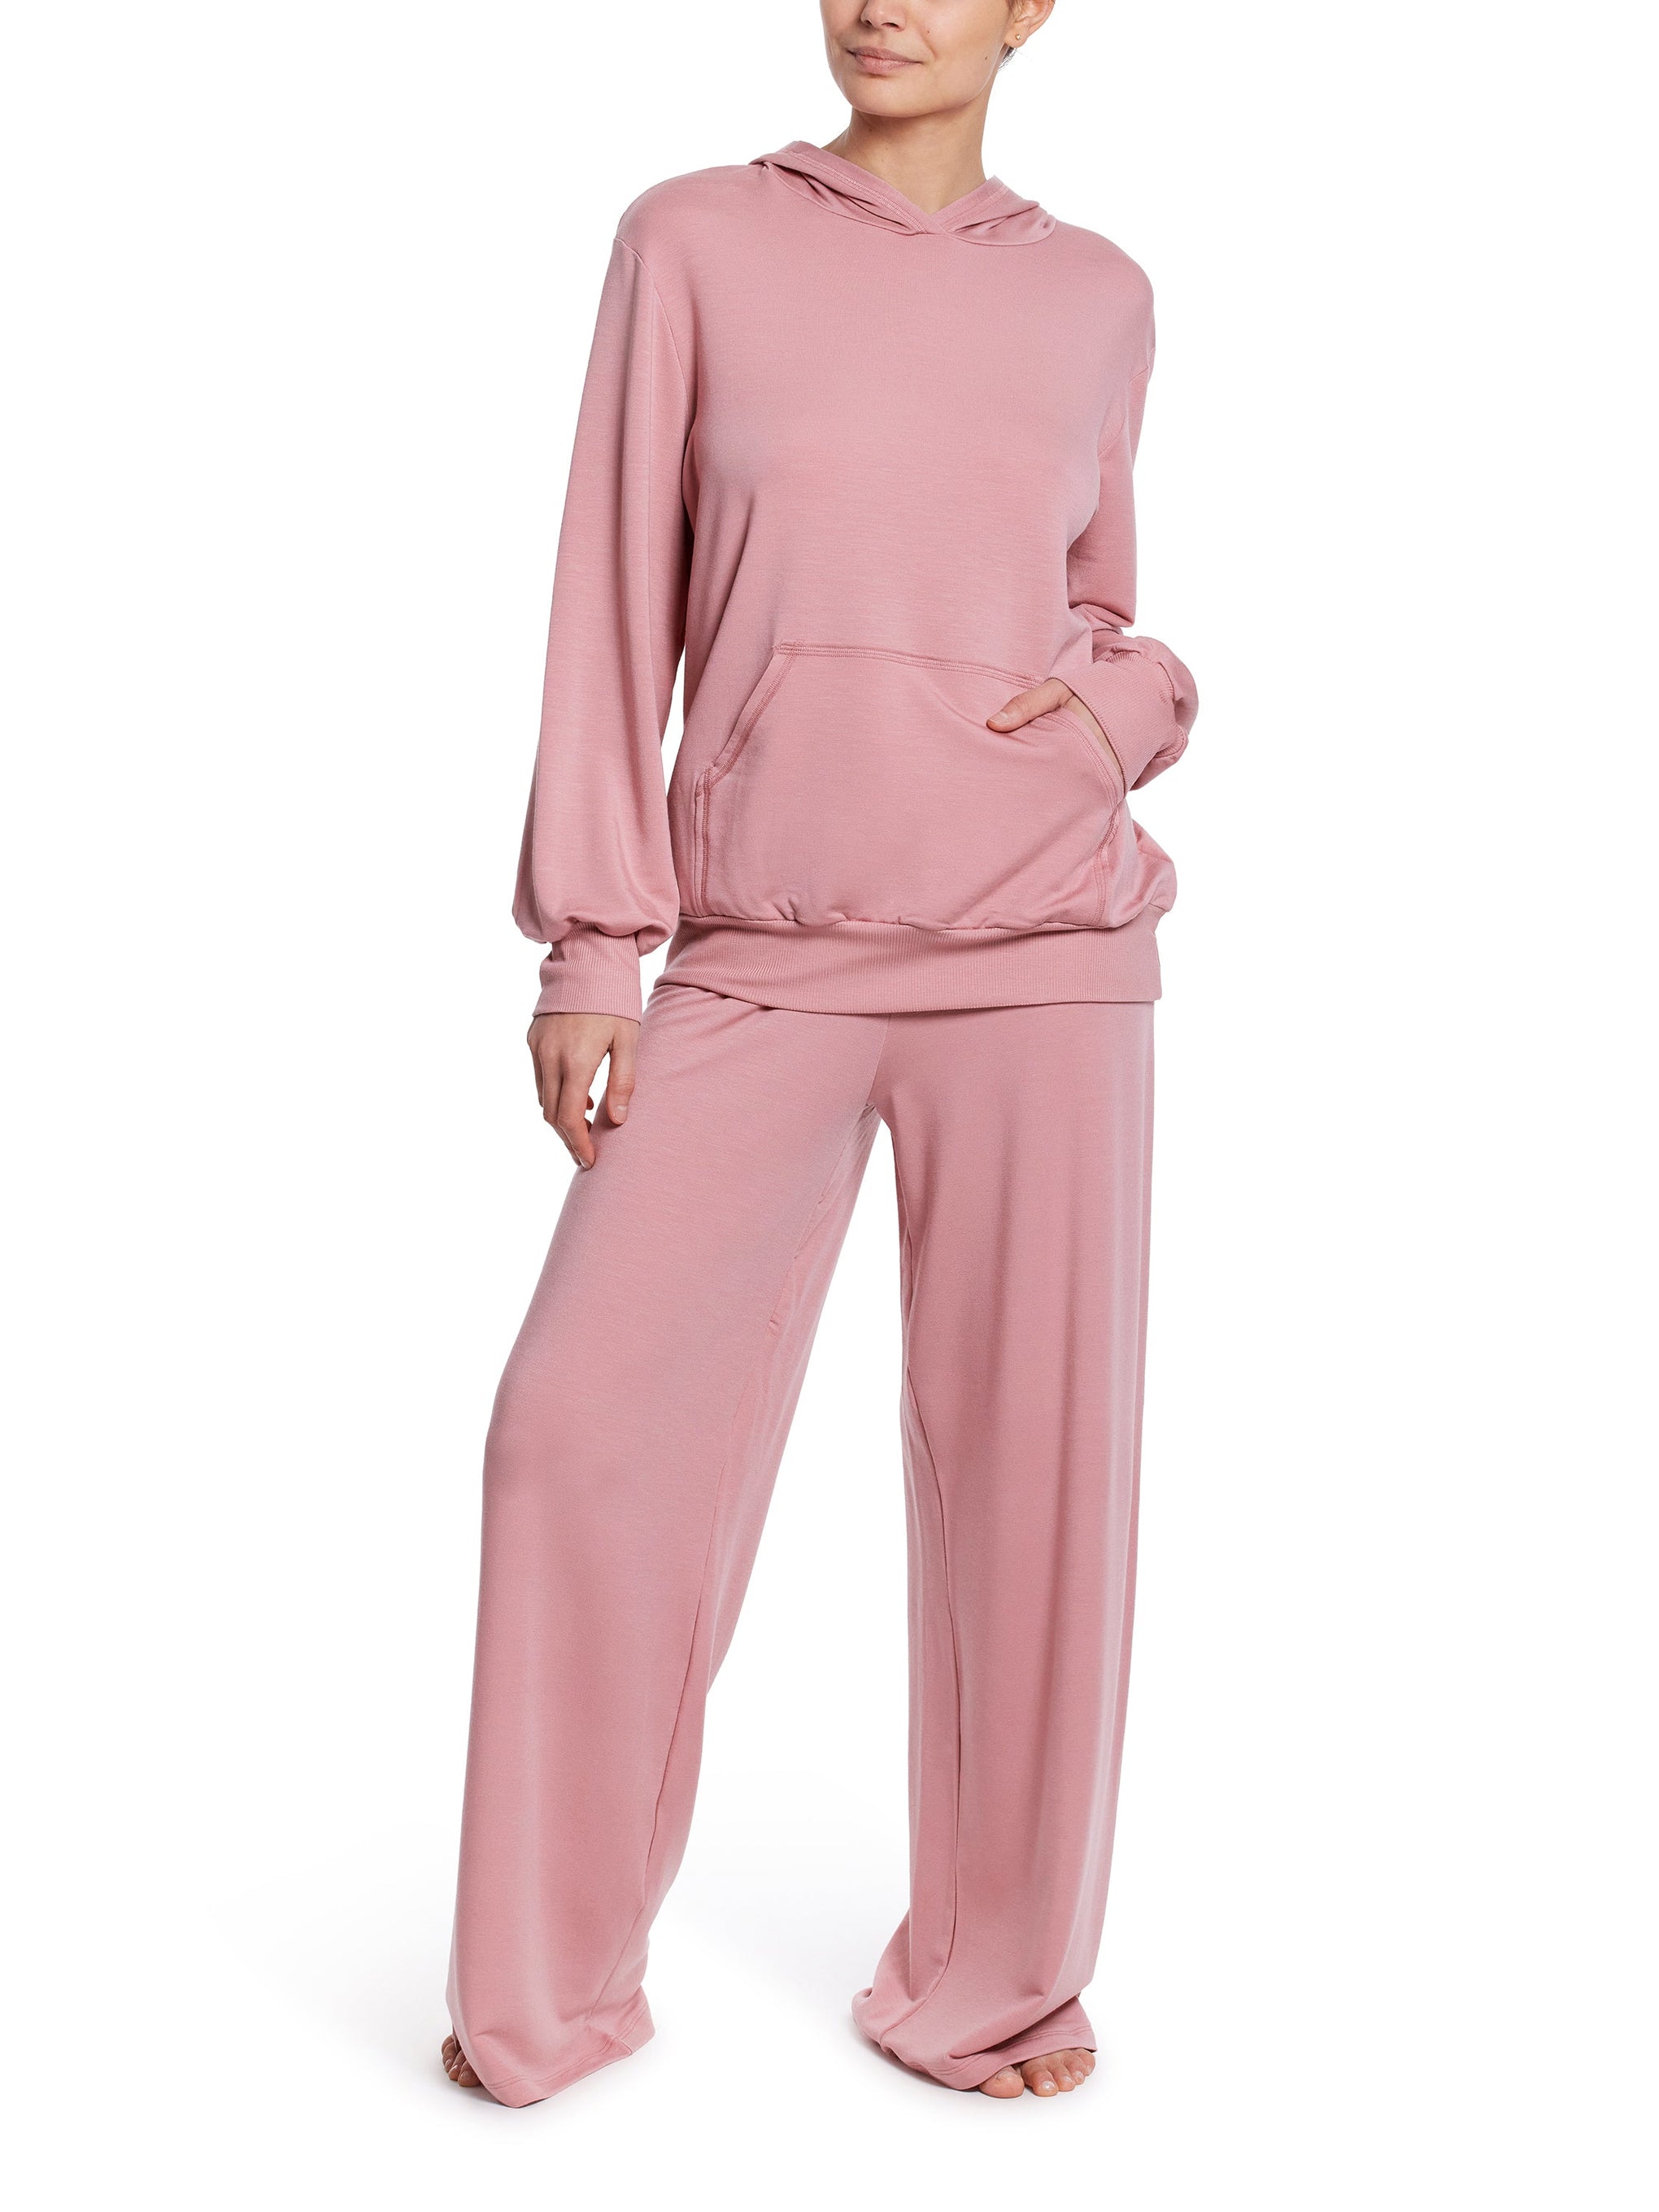 French Terry Hoodie Mauve Orchid Pink